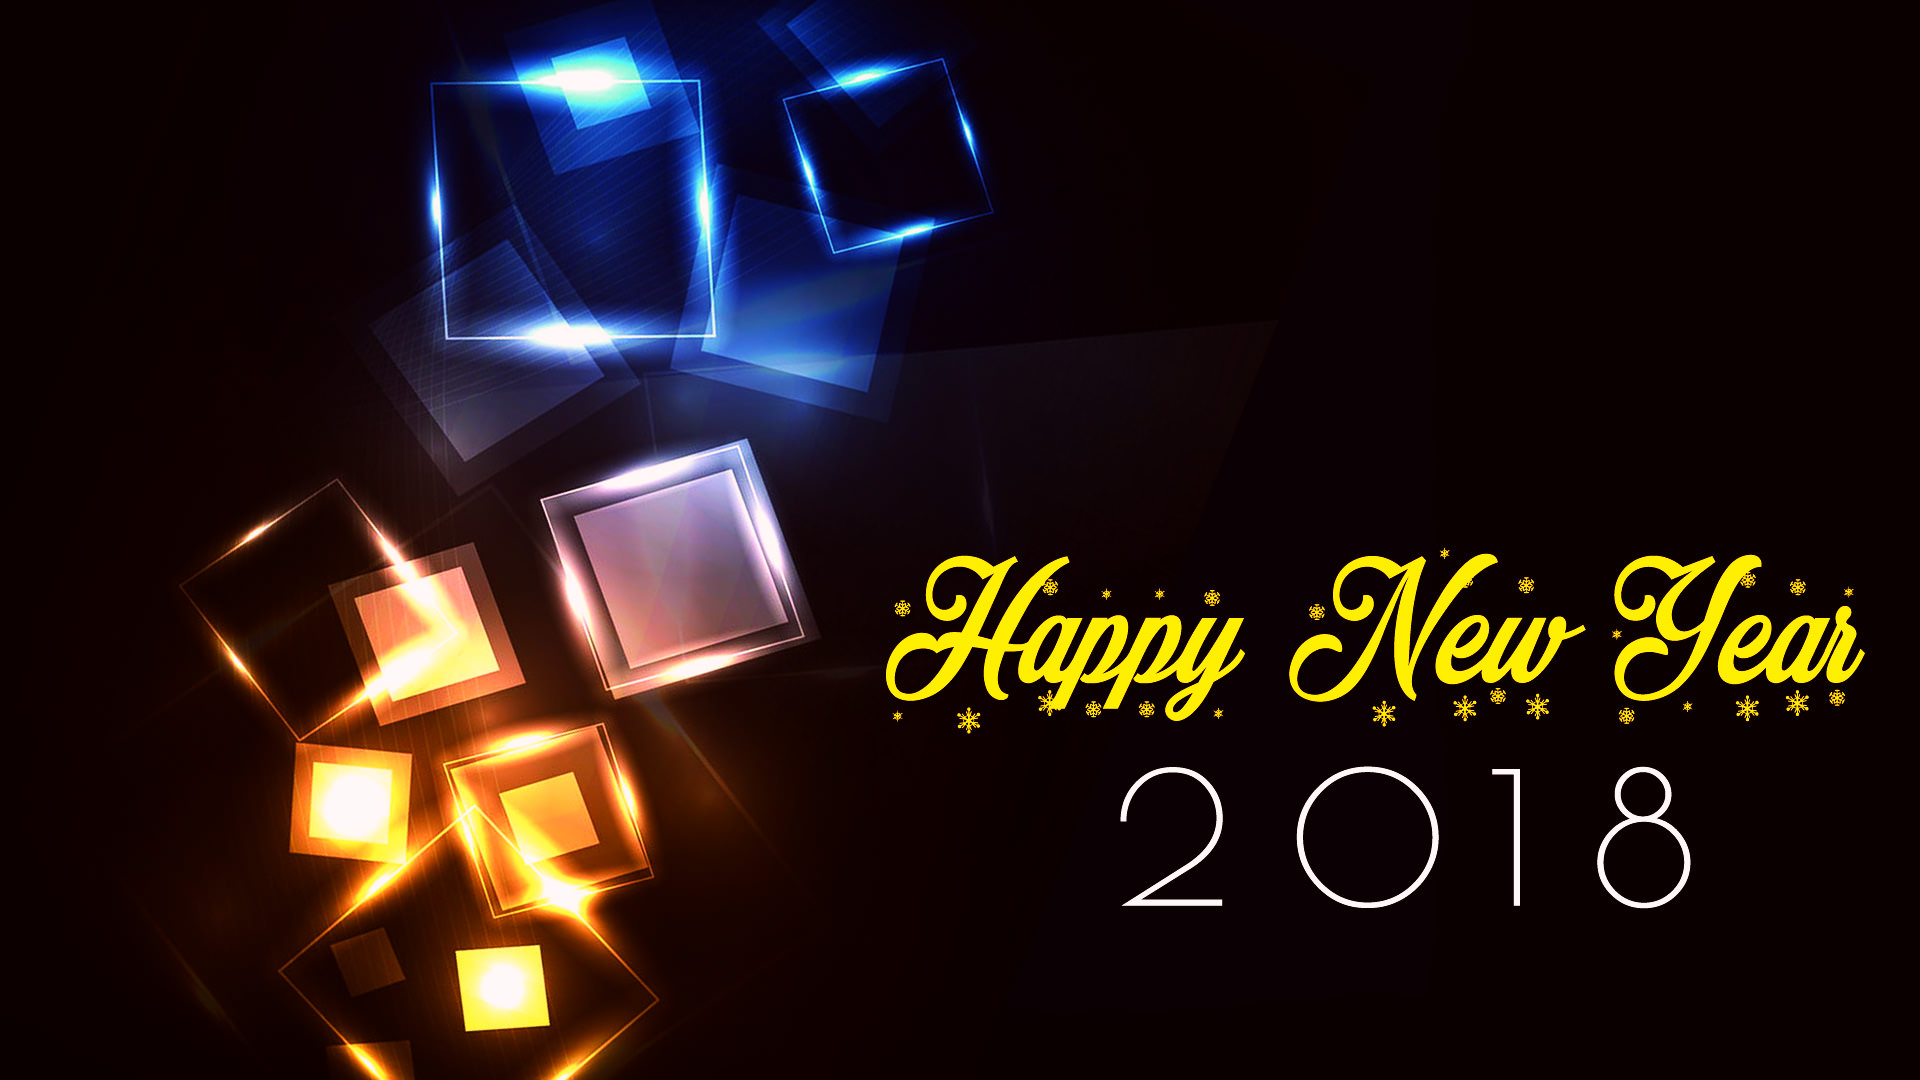 Special Happy New Year 2018 Wallpaper Hd Greetings HD Wallpapers Download Free Images Wallpaper [wallpaper981.blogspot.com]